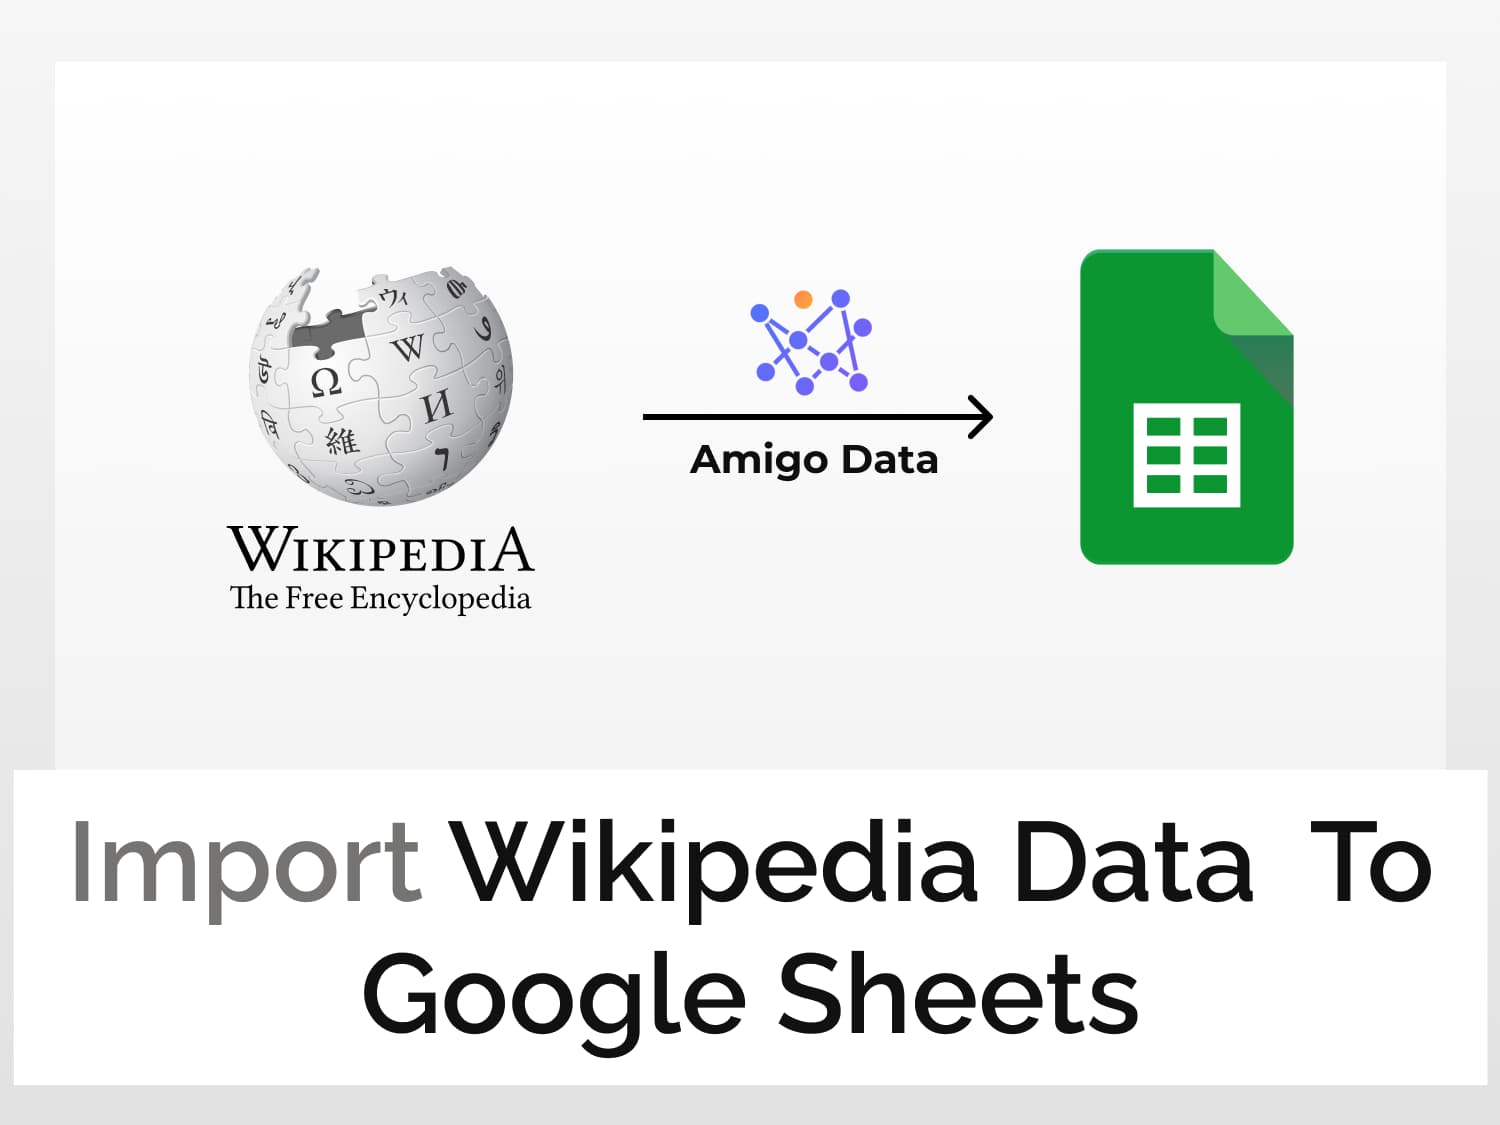 How to import Wikipedia data to Google Sheets